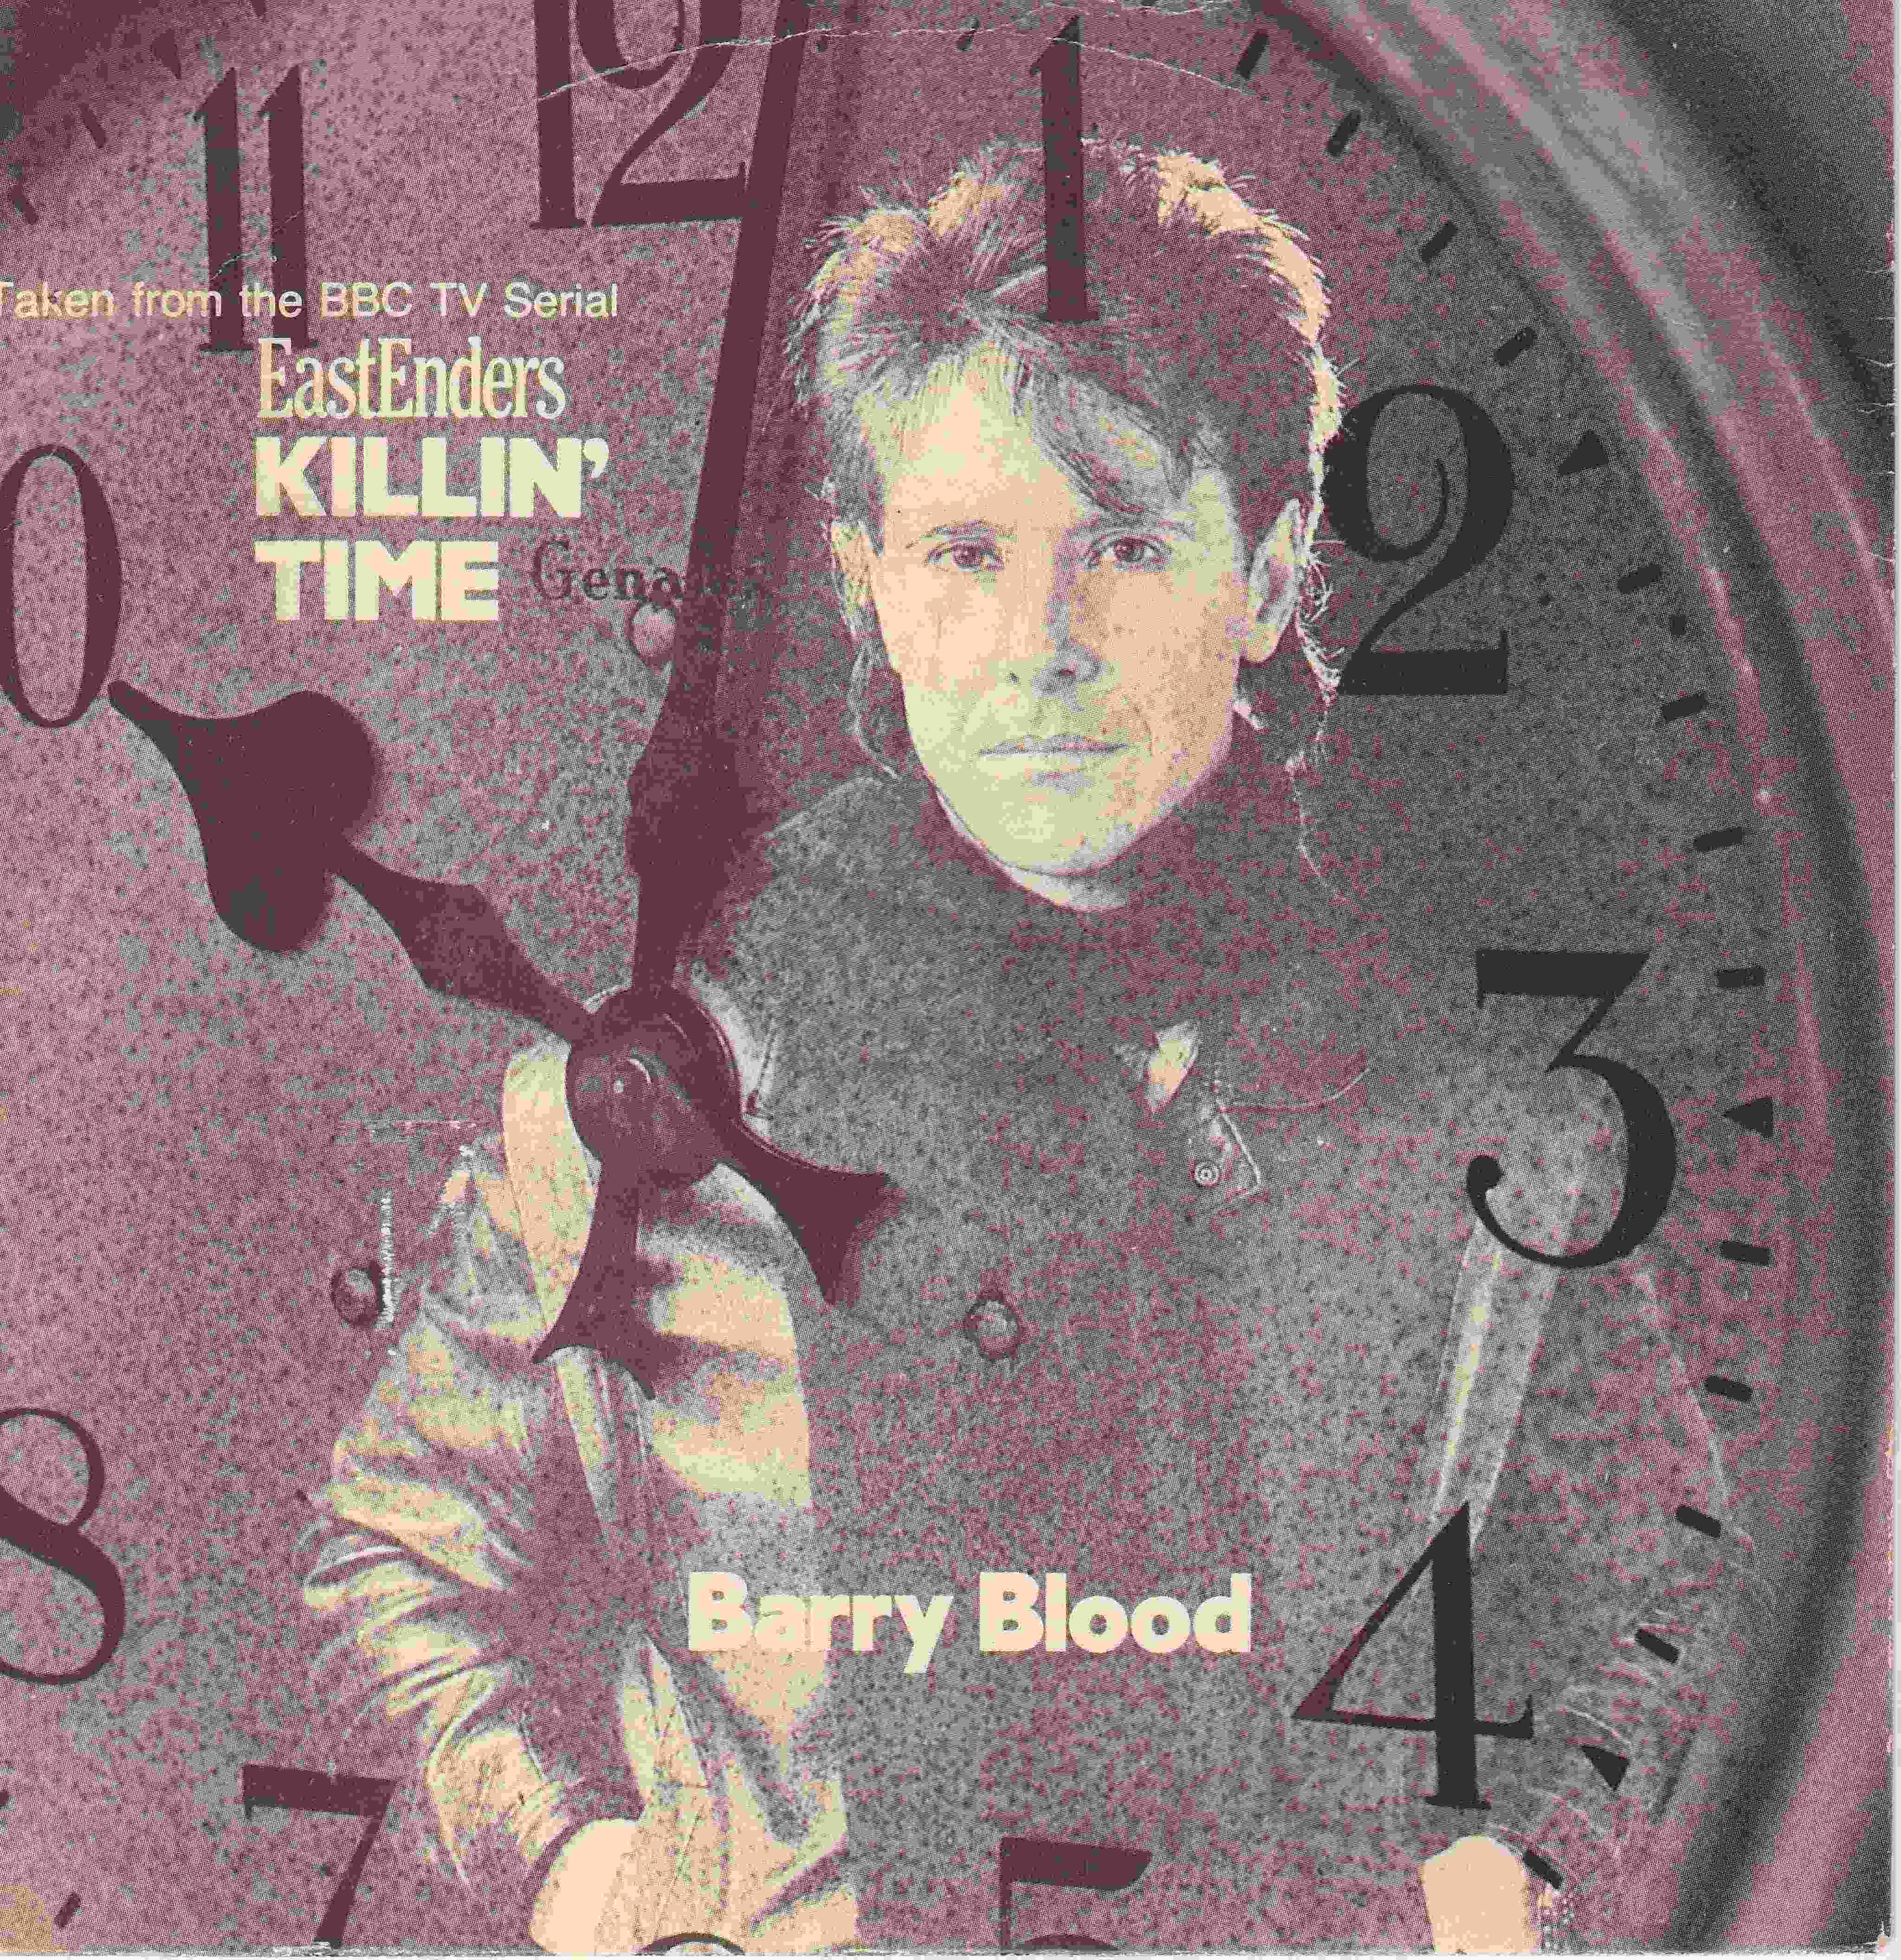 Picture of RESL 168 Killin' time (EastEnders) by artist Barry Blood from the BBC records and Tapes library